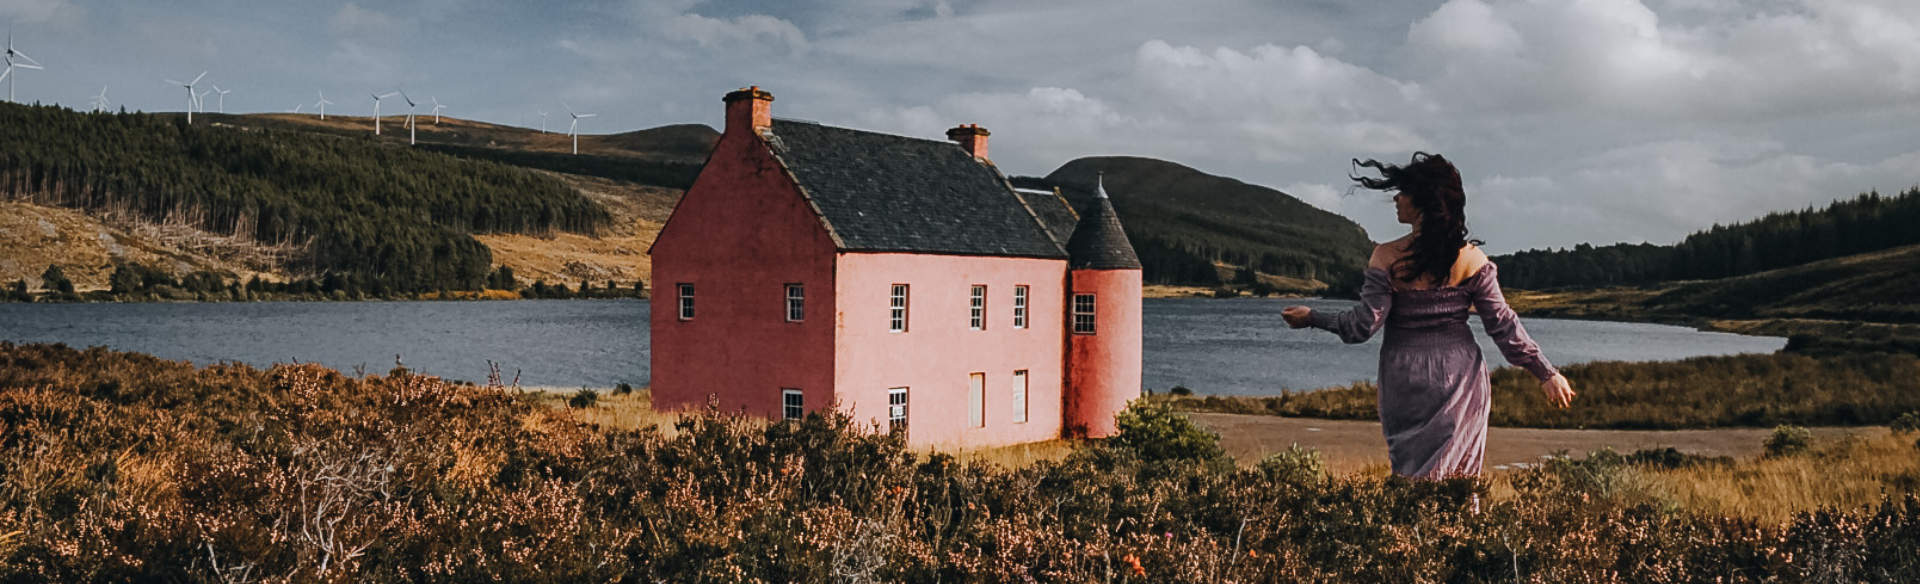 the pink house at green loch